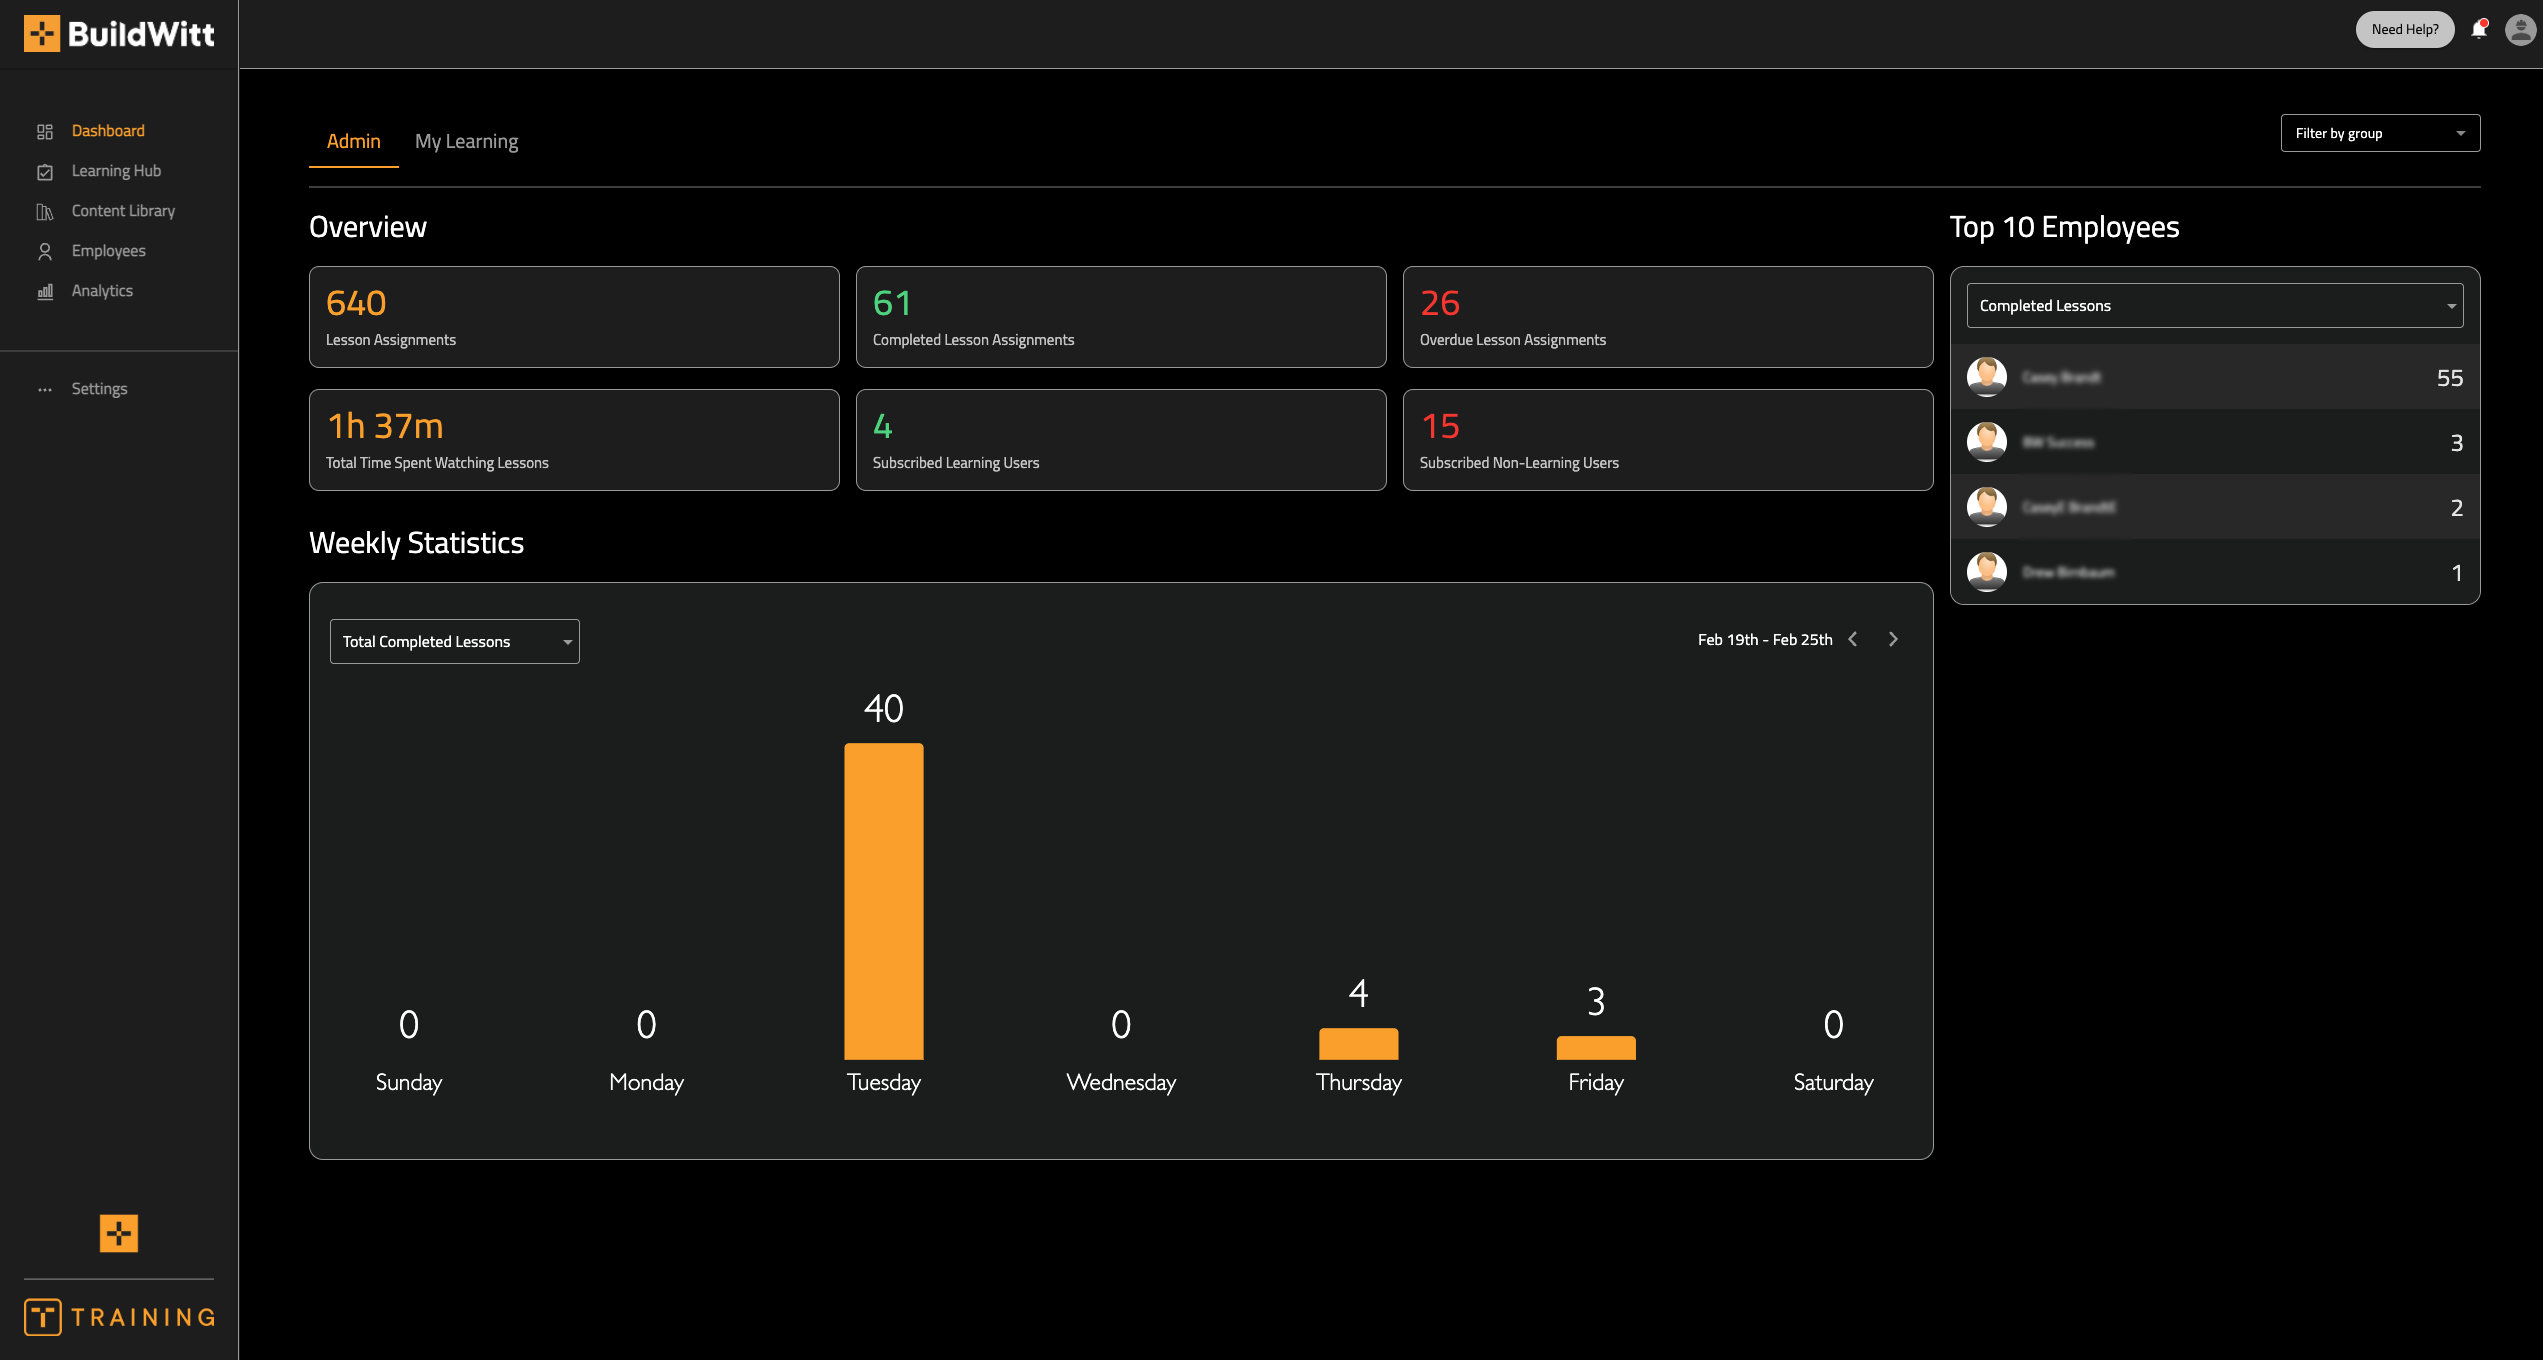 The Dashboard gives a high-level overview of how active your team is in BuildWitt Training. Get a quick view of how active your employees are and how much content your team is completing.